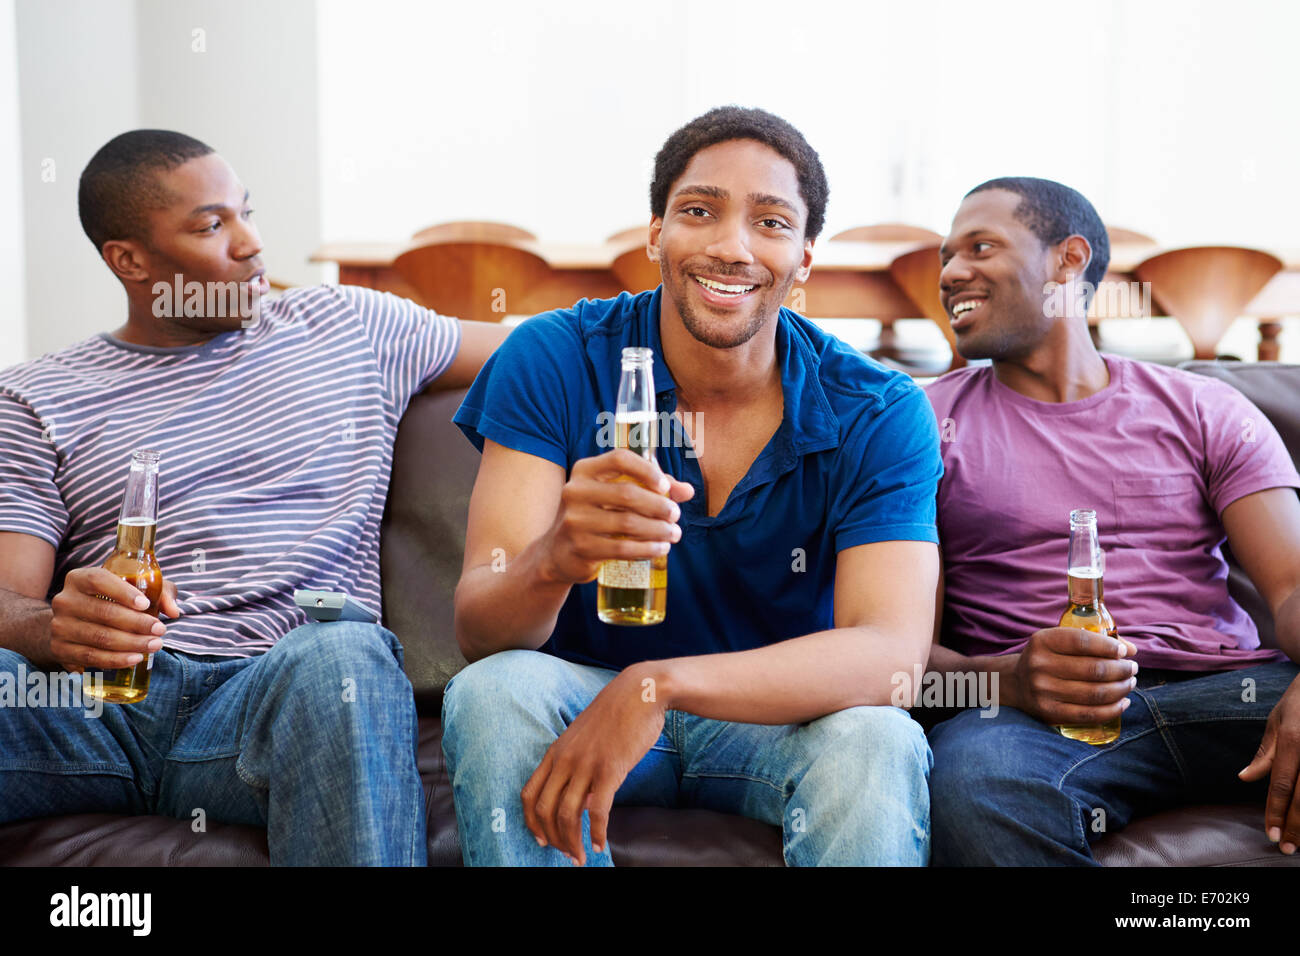 Group Of Men Sitting On Sofa Watching TV Together Stock Photo